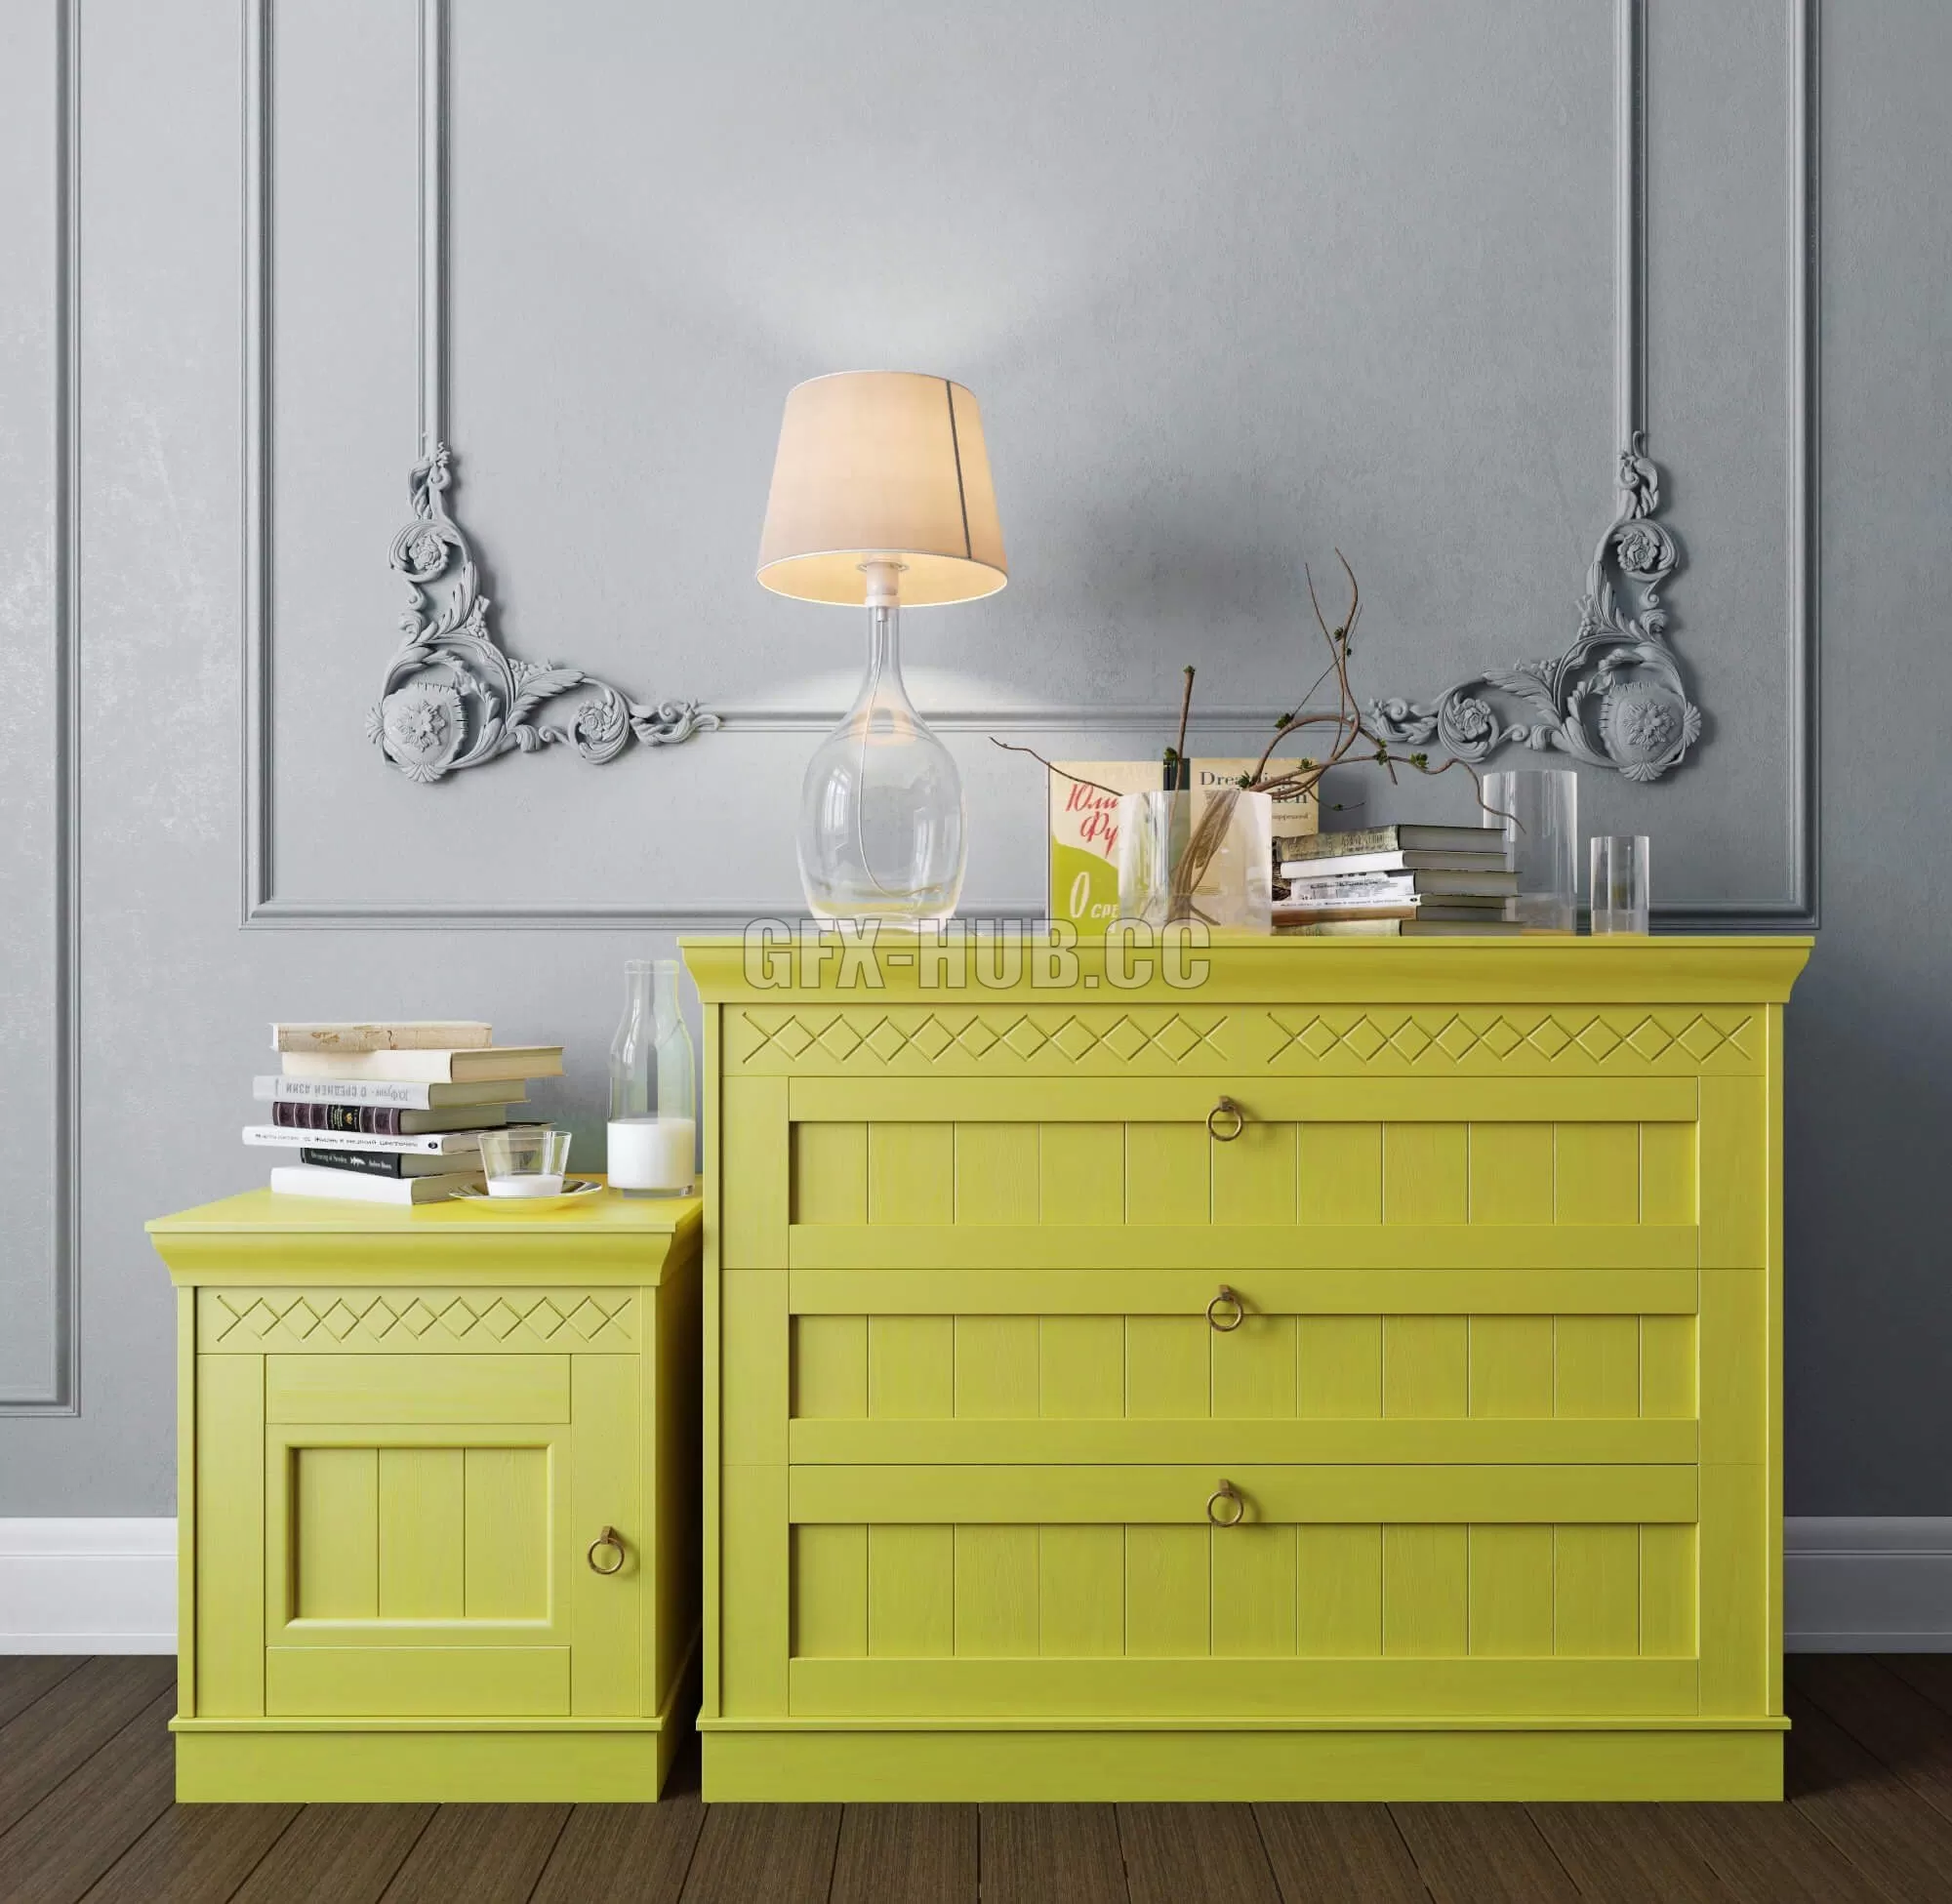 DECORATION – Sideboard with decor set